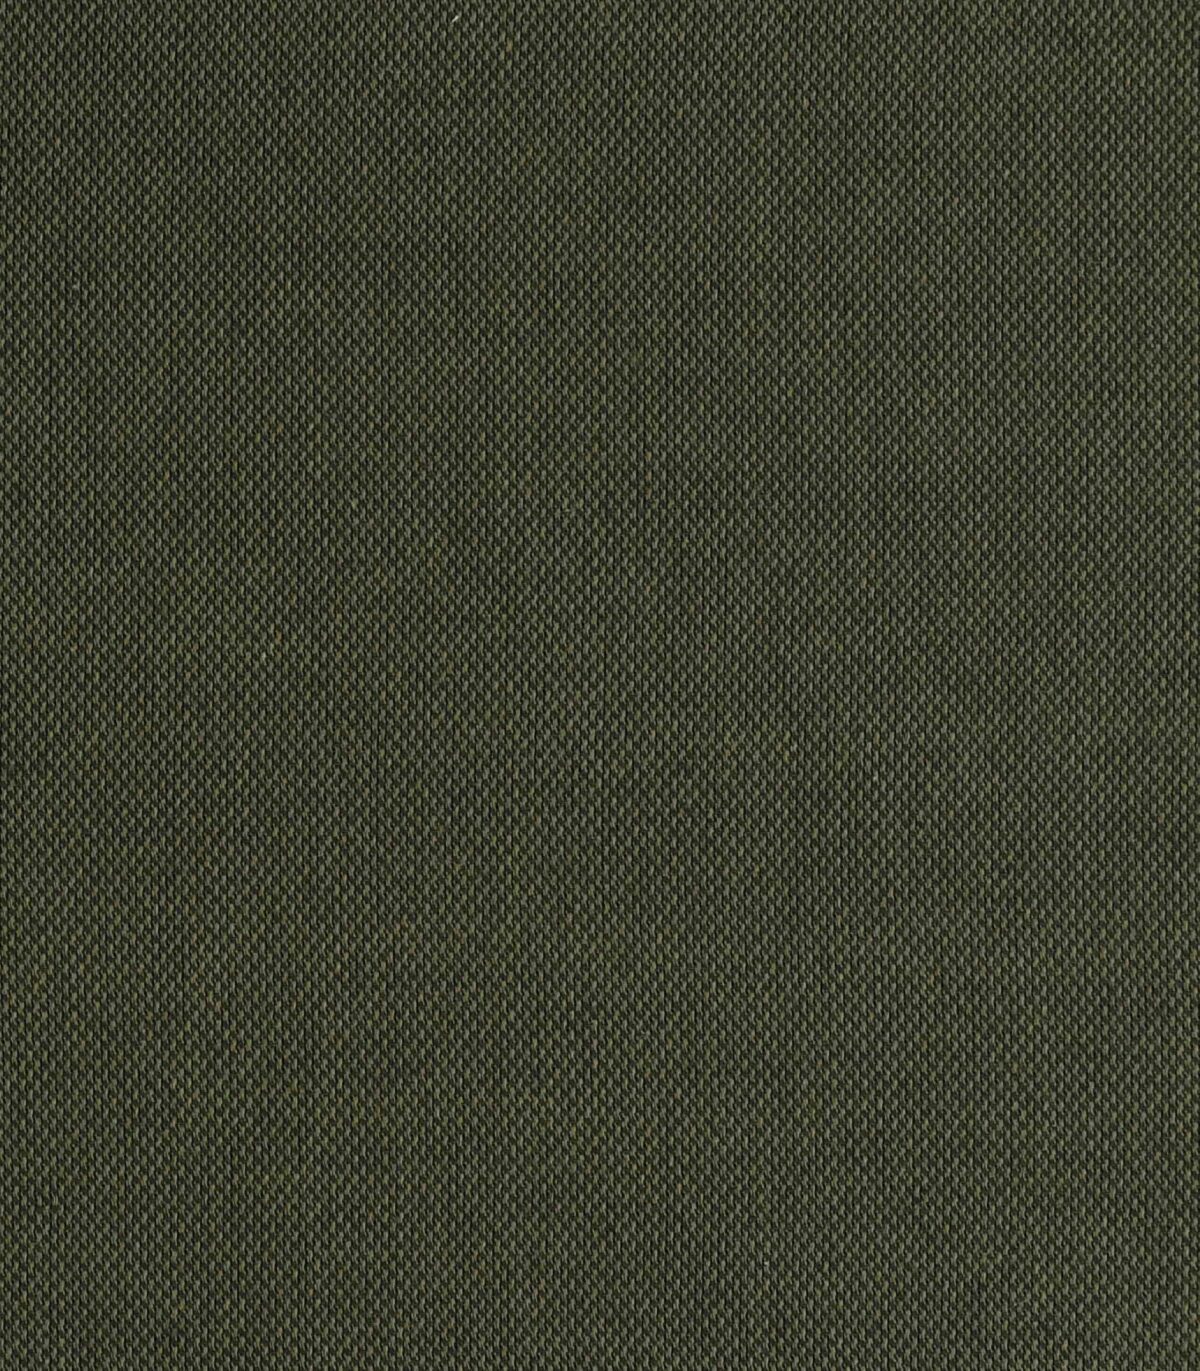 Cotton Olive Green Woven Fabric